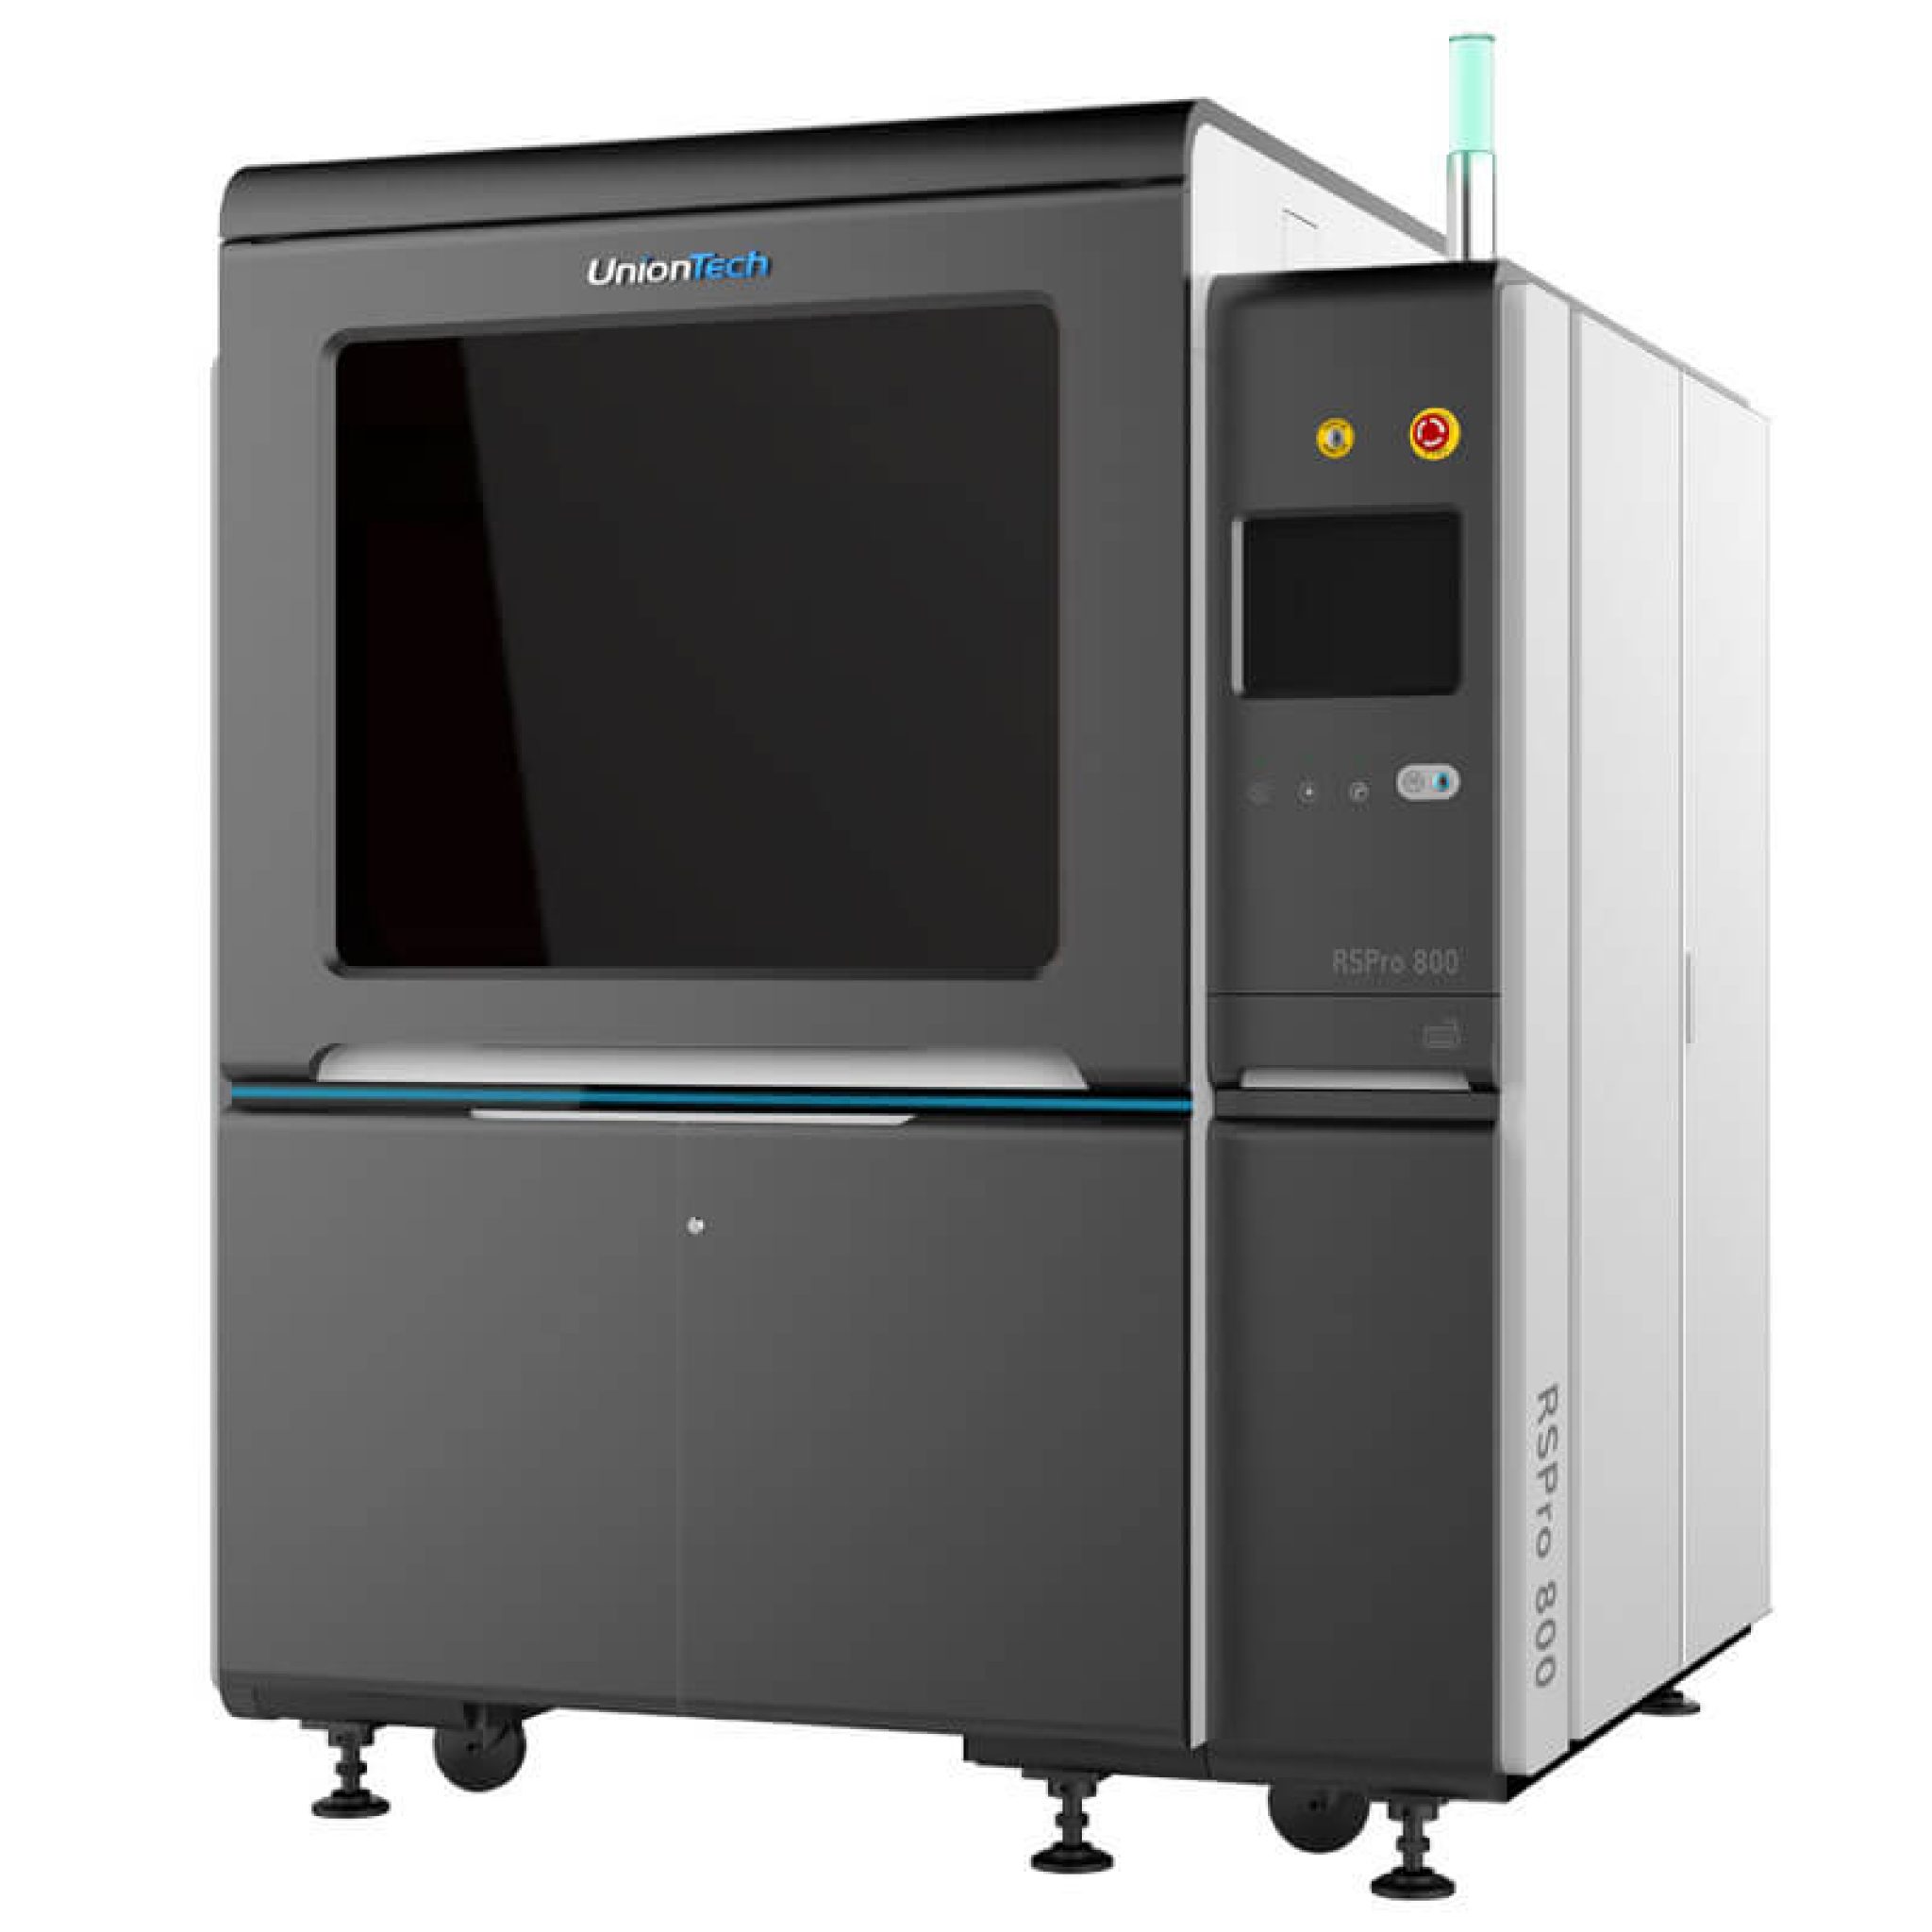 2021-best-large-resin-3d-printer-uses-and-buying-guide-pick-3d-printer